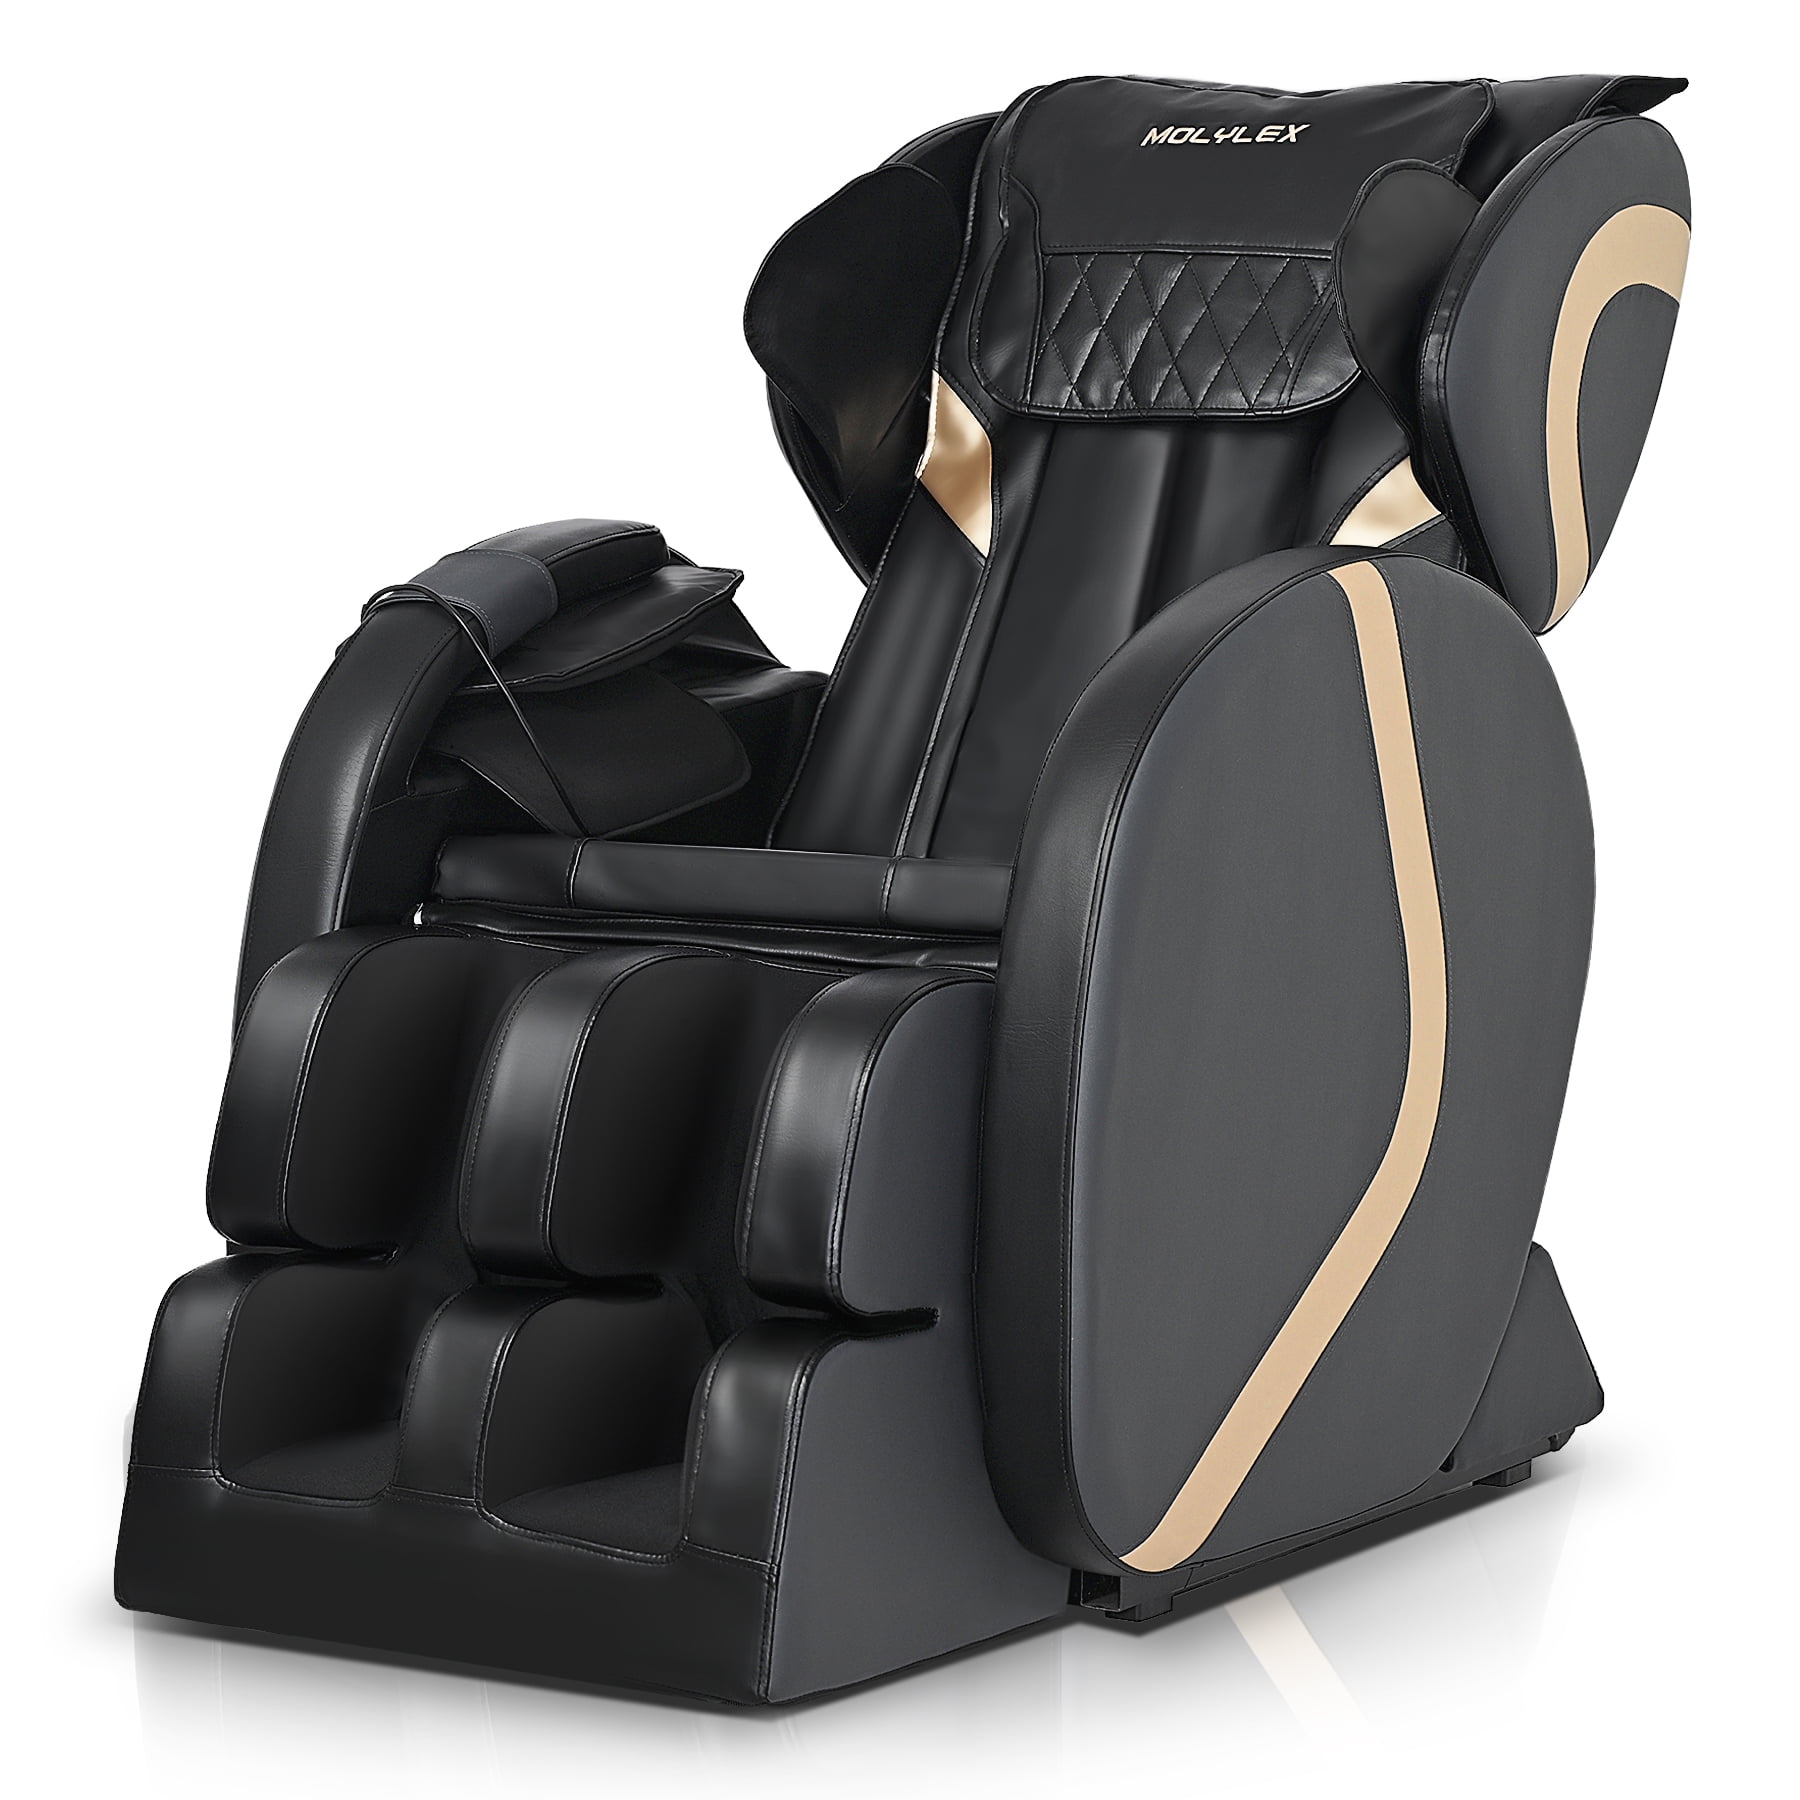 Are Massage Chairs Good For Scoliosis ?